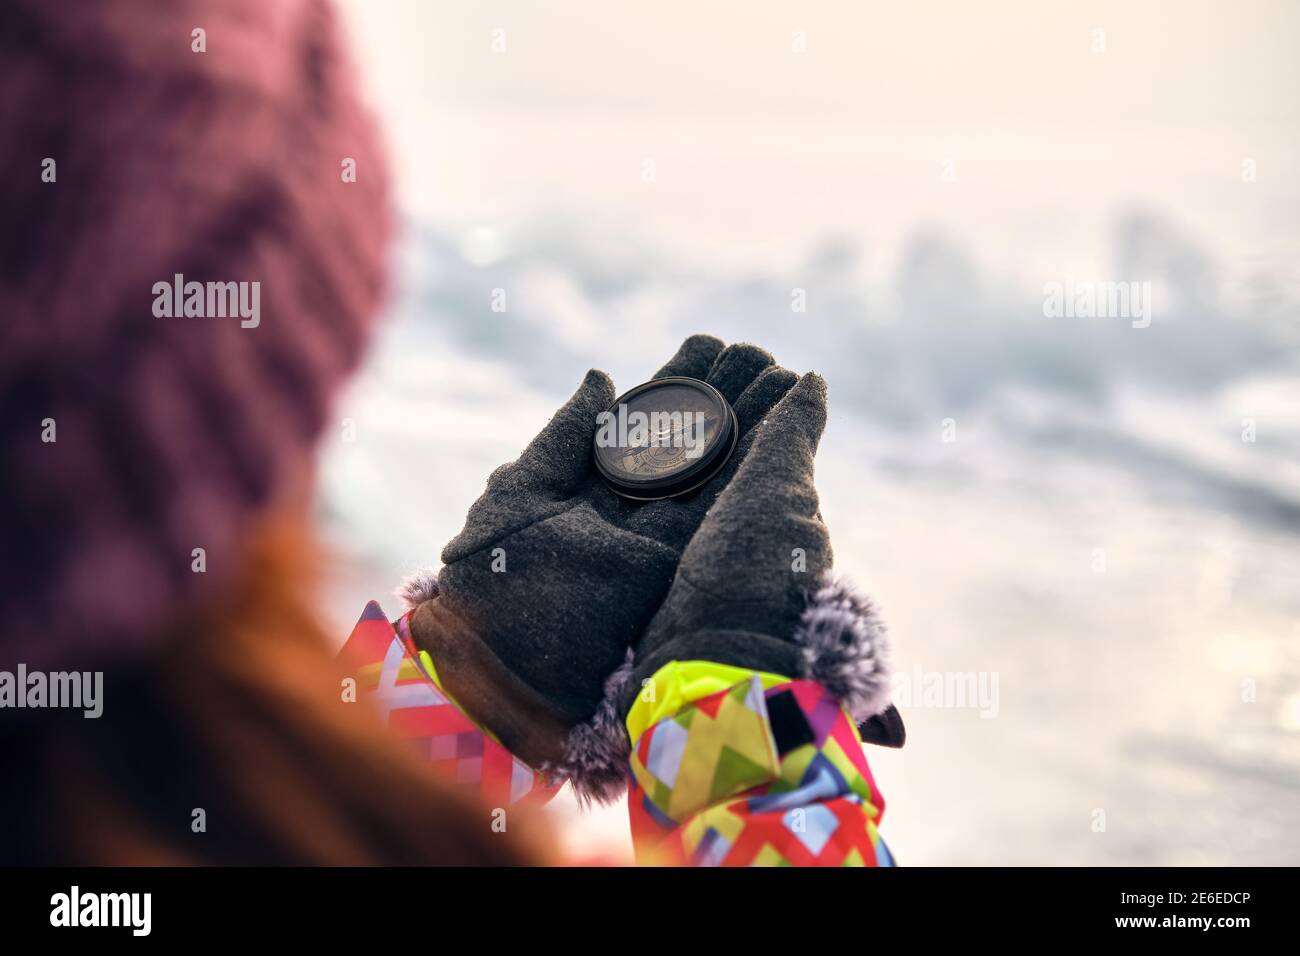 Hiker Hand Holding A Compass And Ices In Background Stock Photo